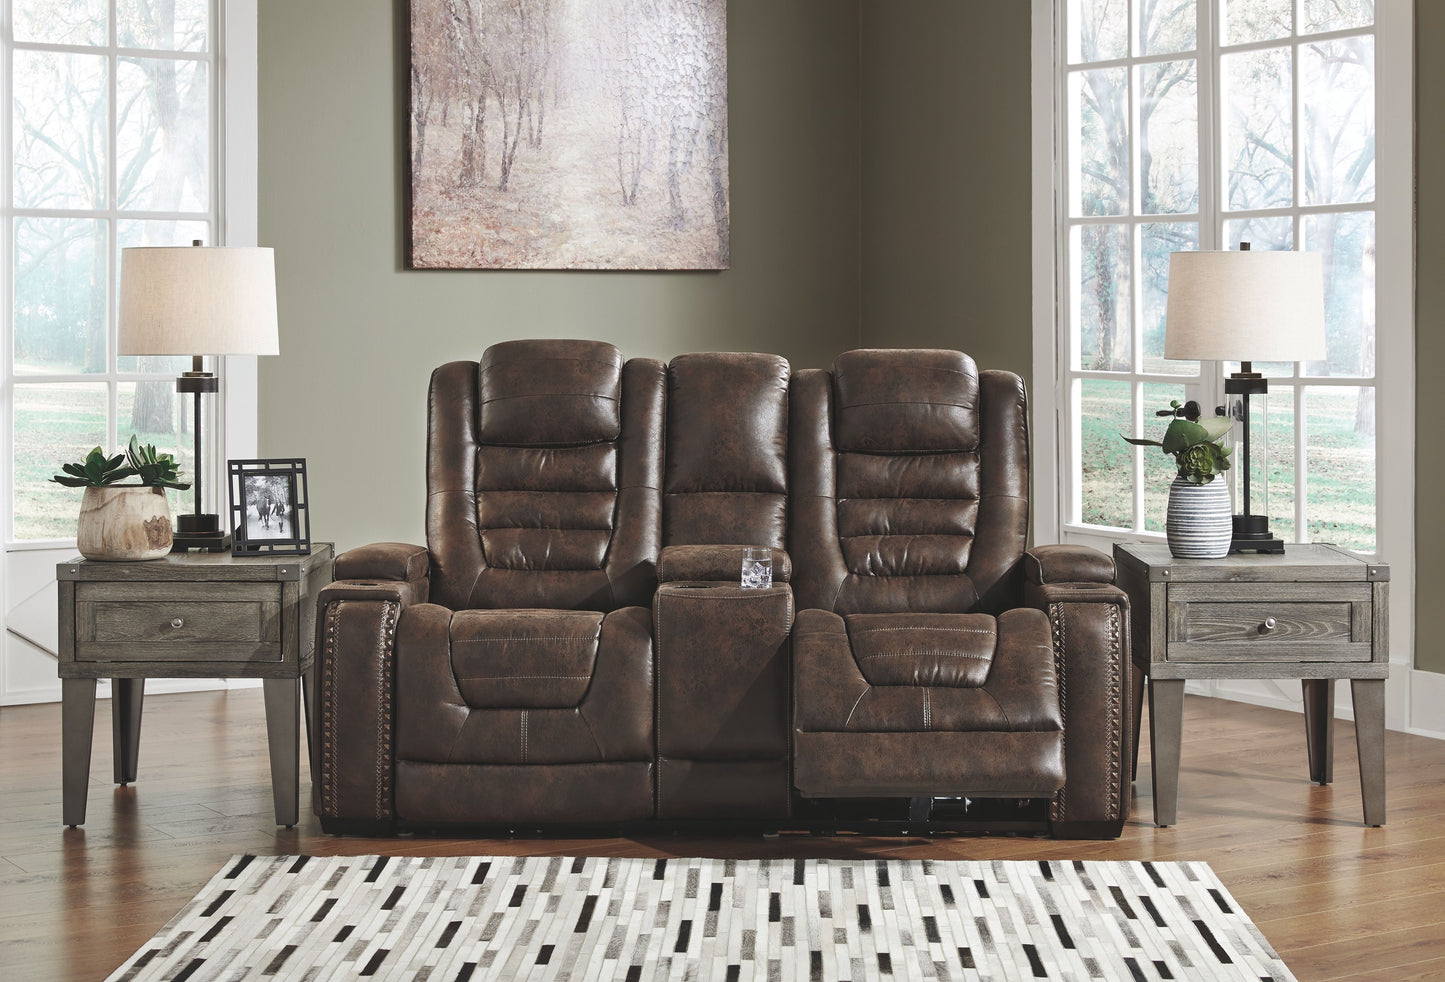 Game Zone - Reclining Living Room Set